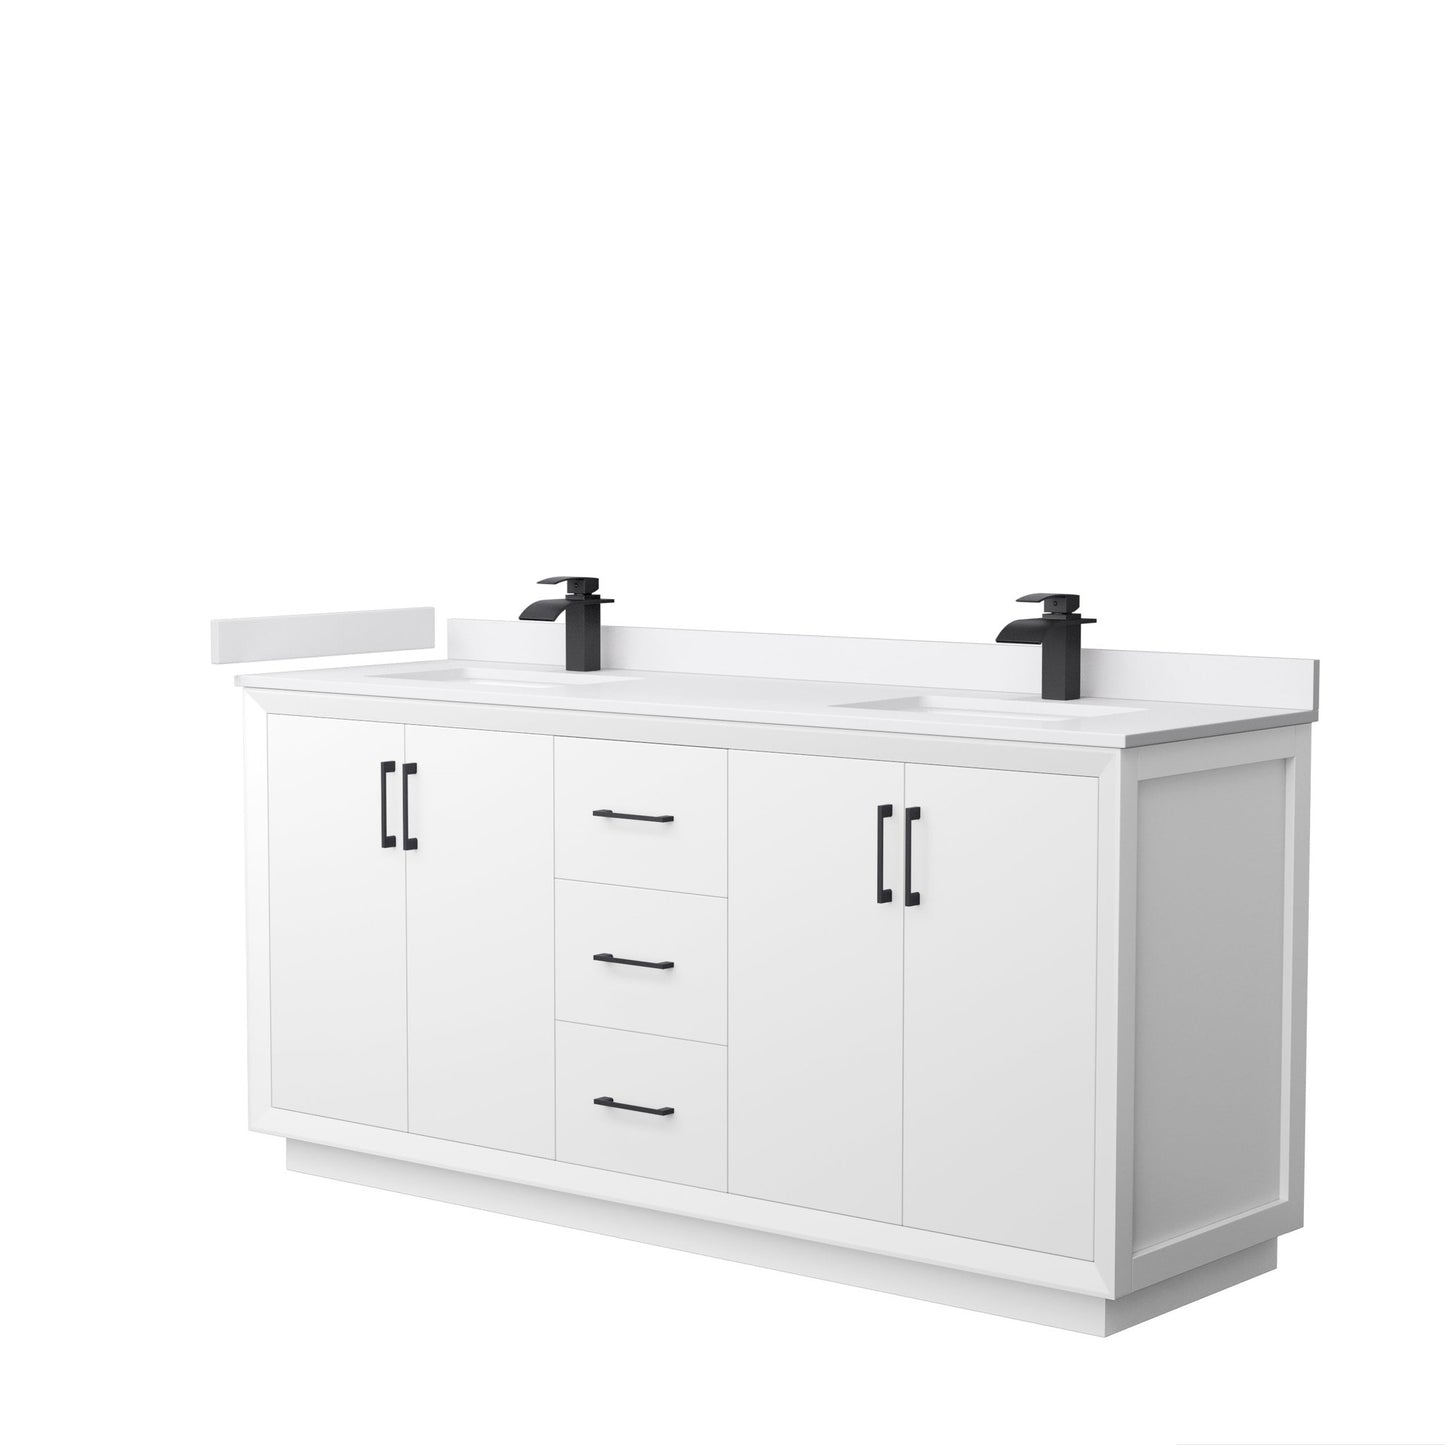 Wyndham Collection Strada 72" Double Bathroom Vanity in White, White Cultured Marble Countertop, Undermount Square Sink, Matte Black Trim